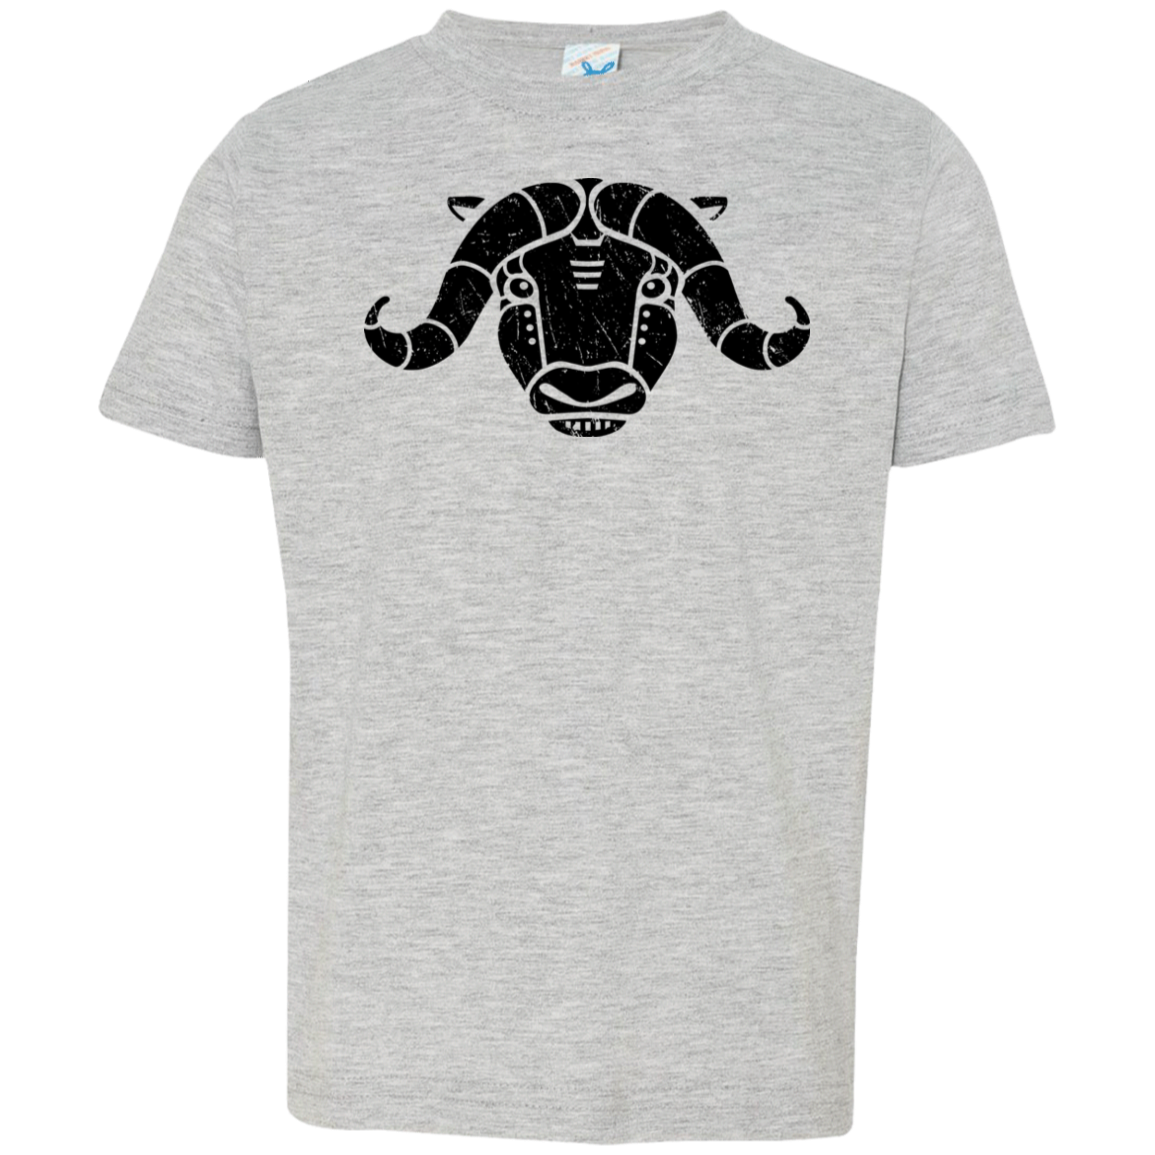 Black Distressed Emblem T-Shirt for Toddlers (Musk Ox/Moxie)